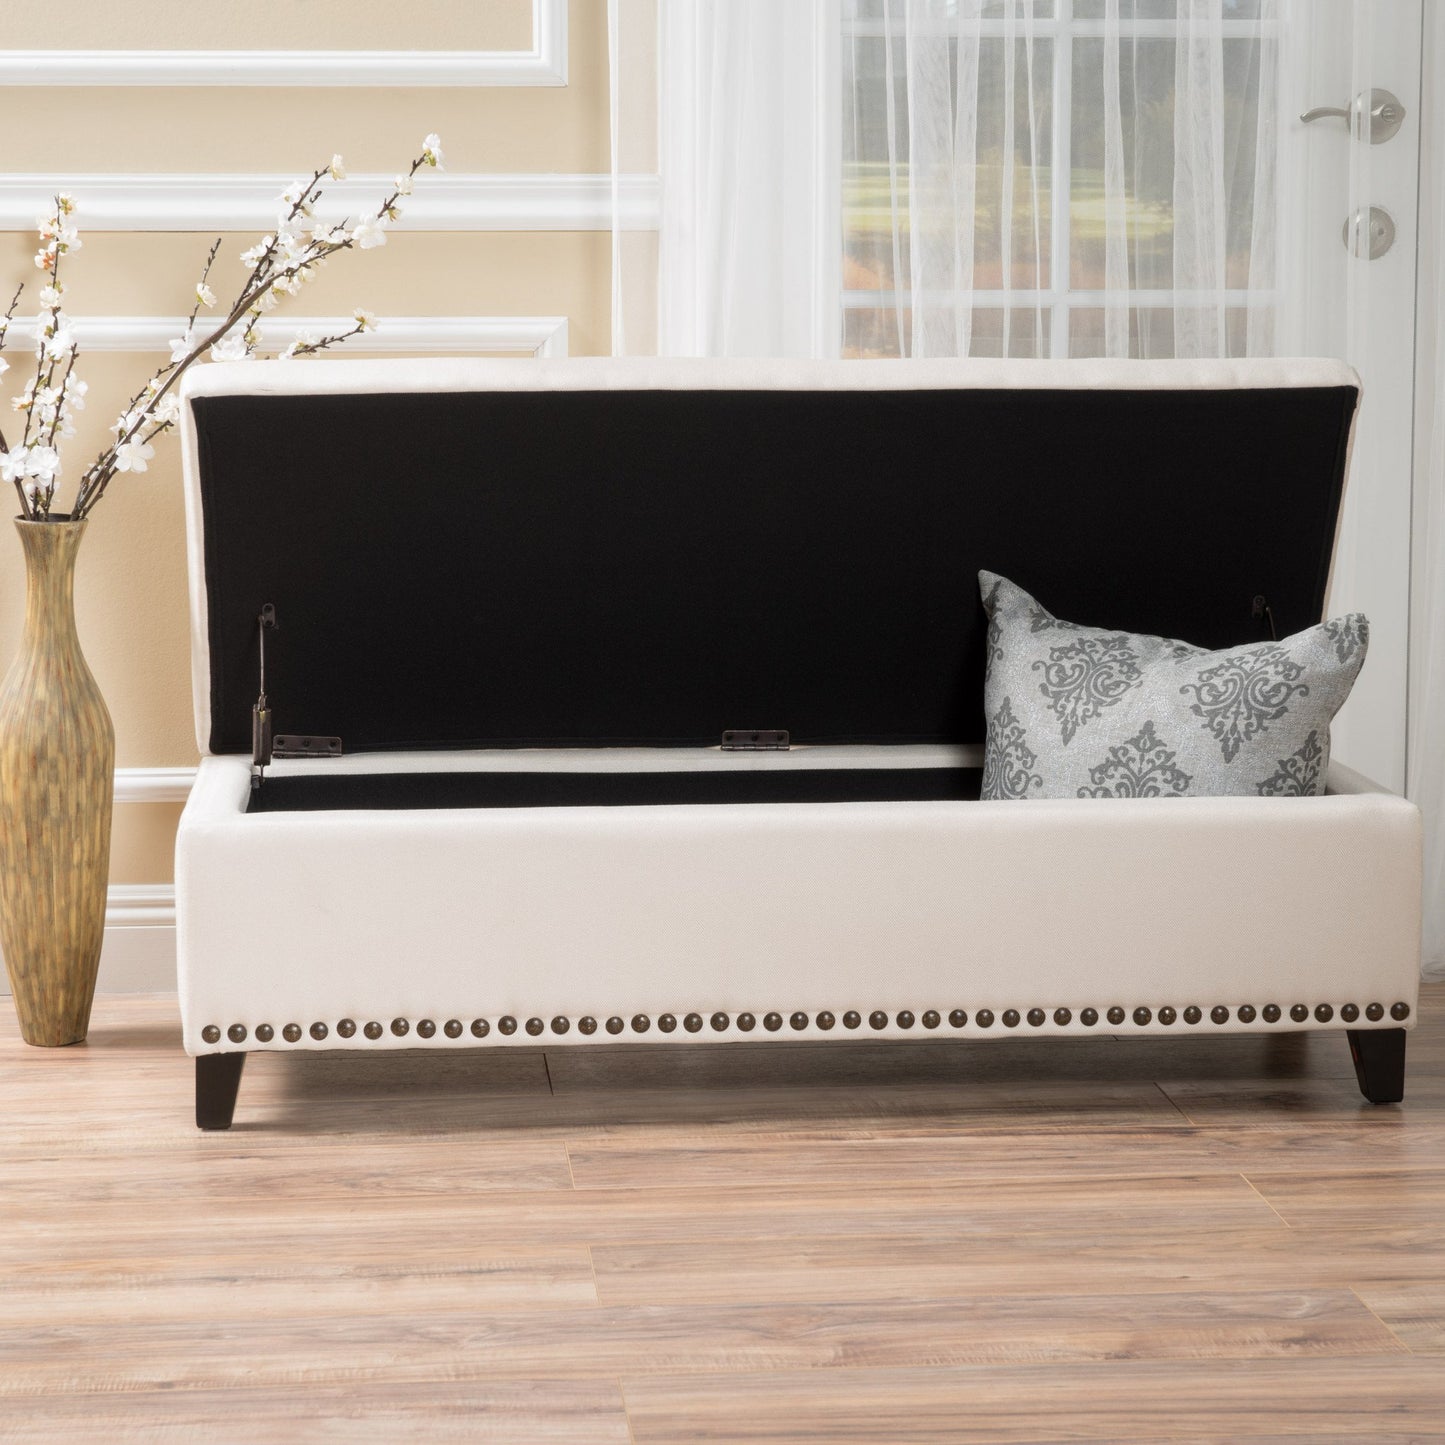 Labella Contemporary Fabric Upholstered Storage Ottoman with Nailhead Trim